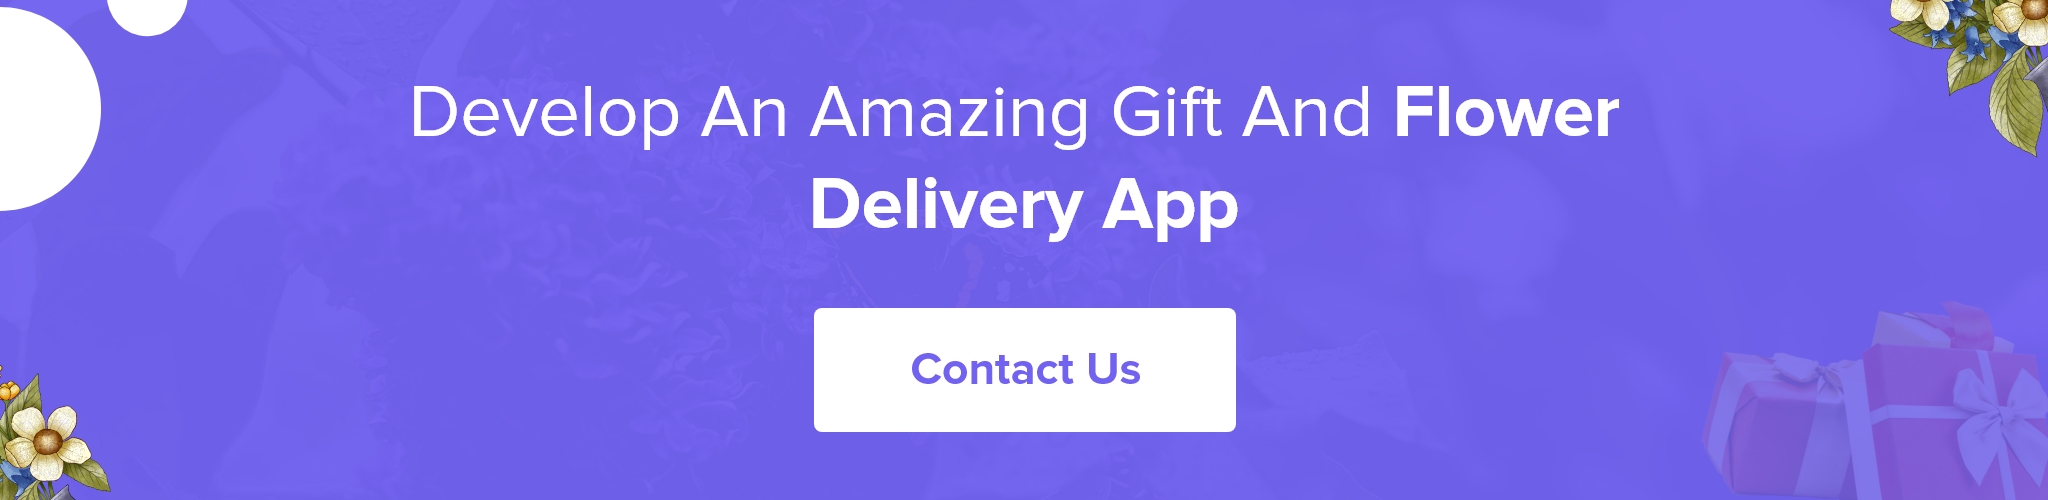 develop gift and flower delivery app